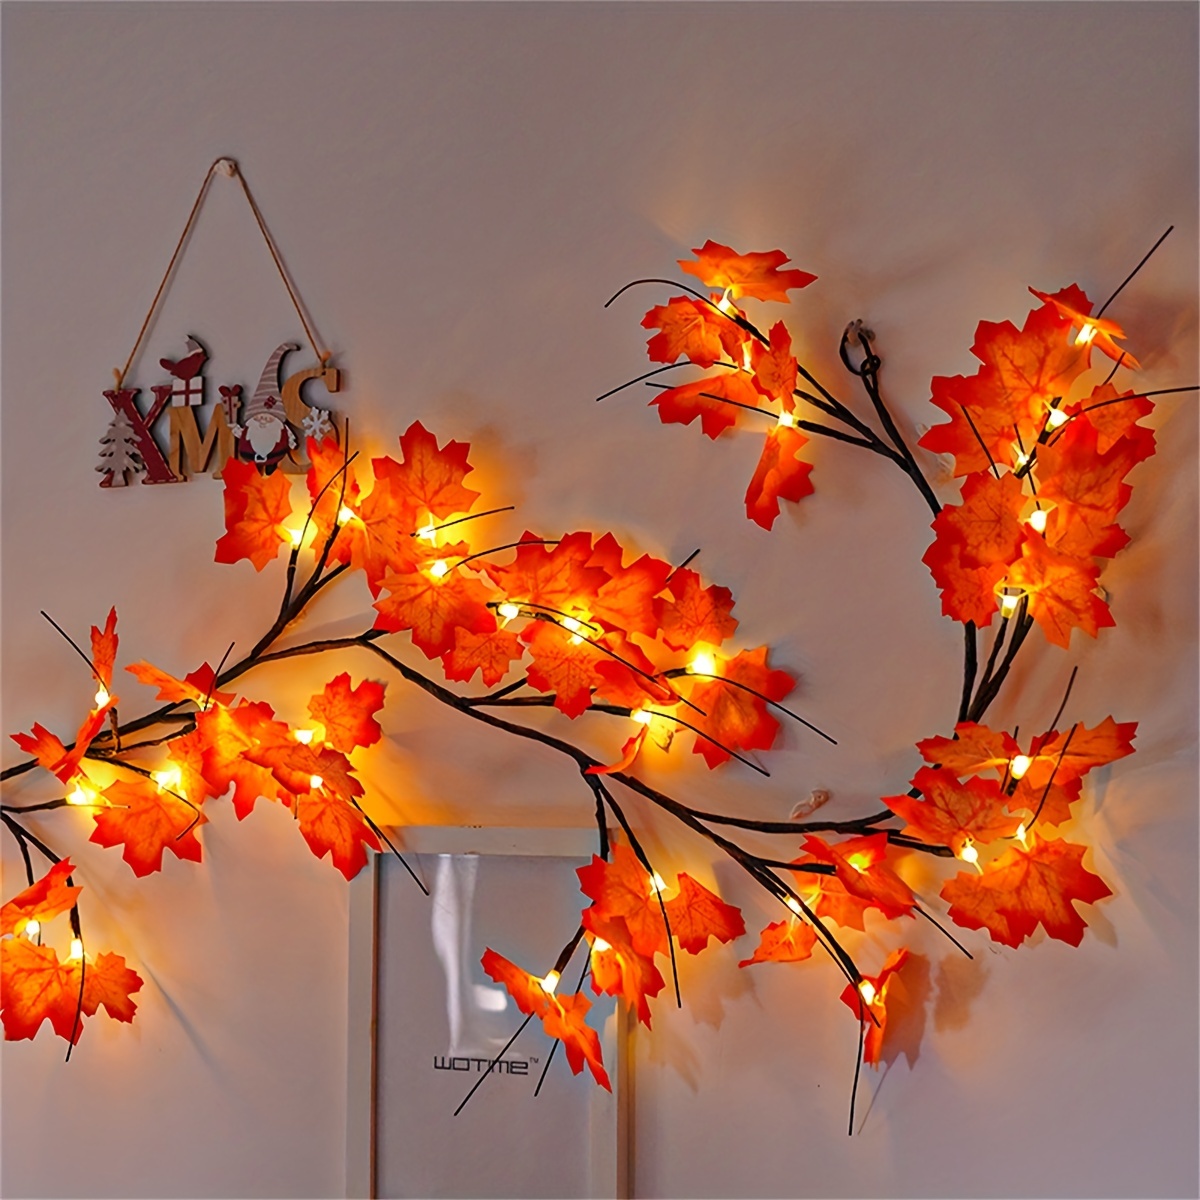 1pc enchanted willow vine lights for home decor christmas decorations flexible diy indoor artificial plants tree branches 48 leds 1 7m 5 58ft maple leaf willow vine lights for walls bedroom living room decor halloween thanksgiving details 4